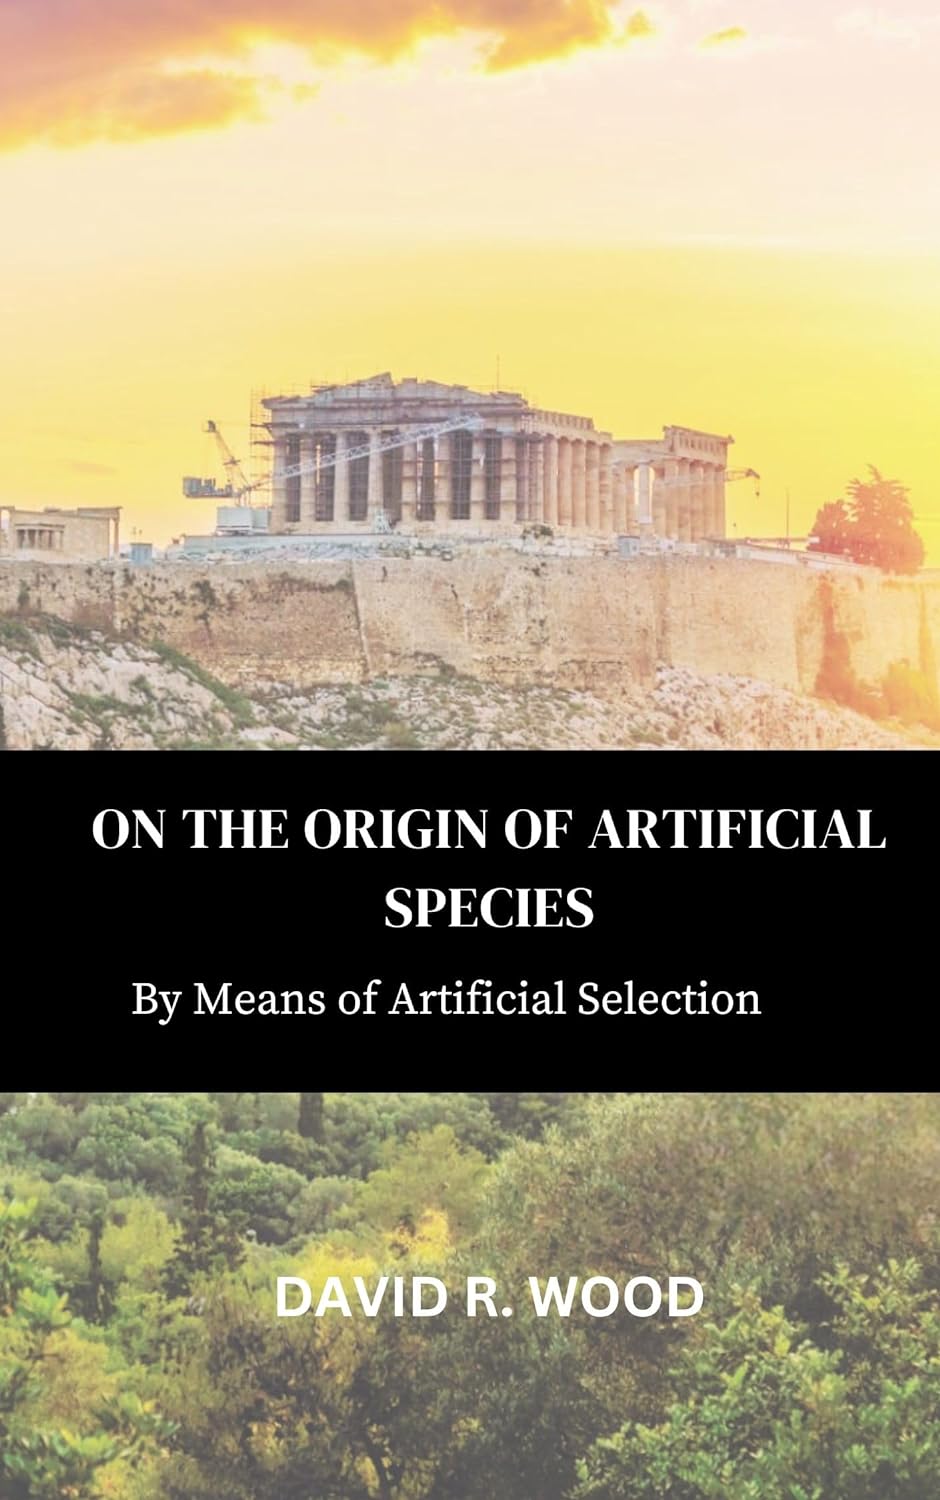 David R. Wood Releases New Book - On the Origin of Artificial Species: By Means of Artificial Selection